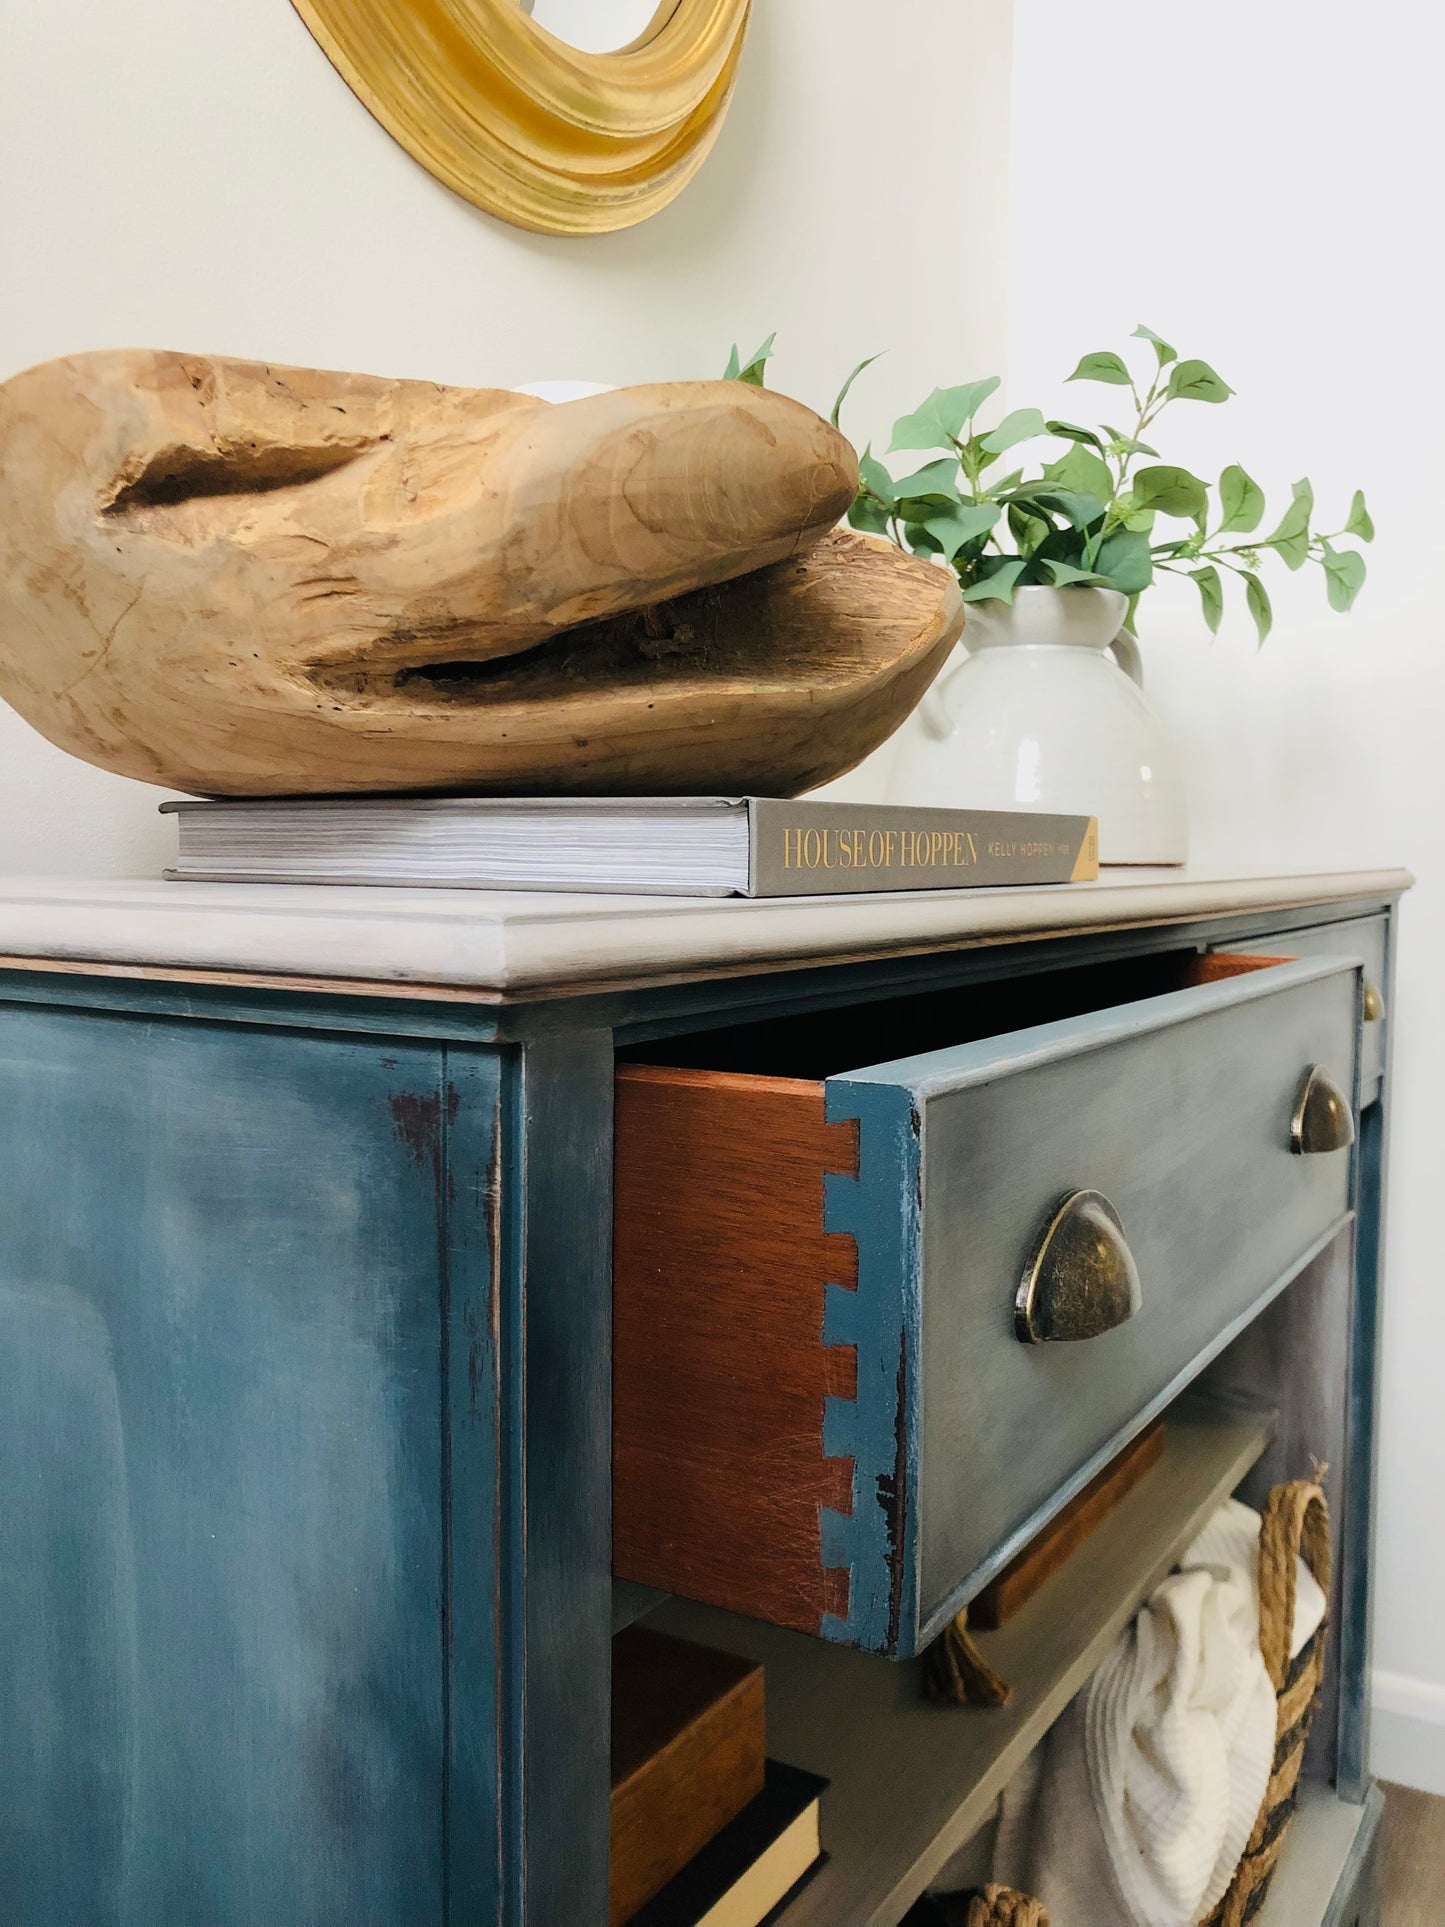 . Sideboard, Open Shelving And Two Drawers, Rustic Blue Paint Effect, Whitewashed Wood Top